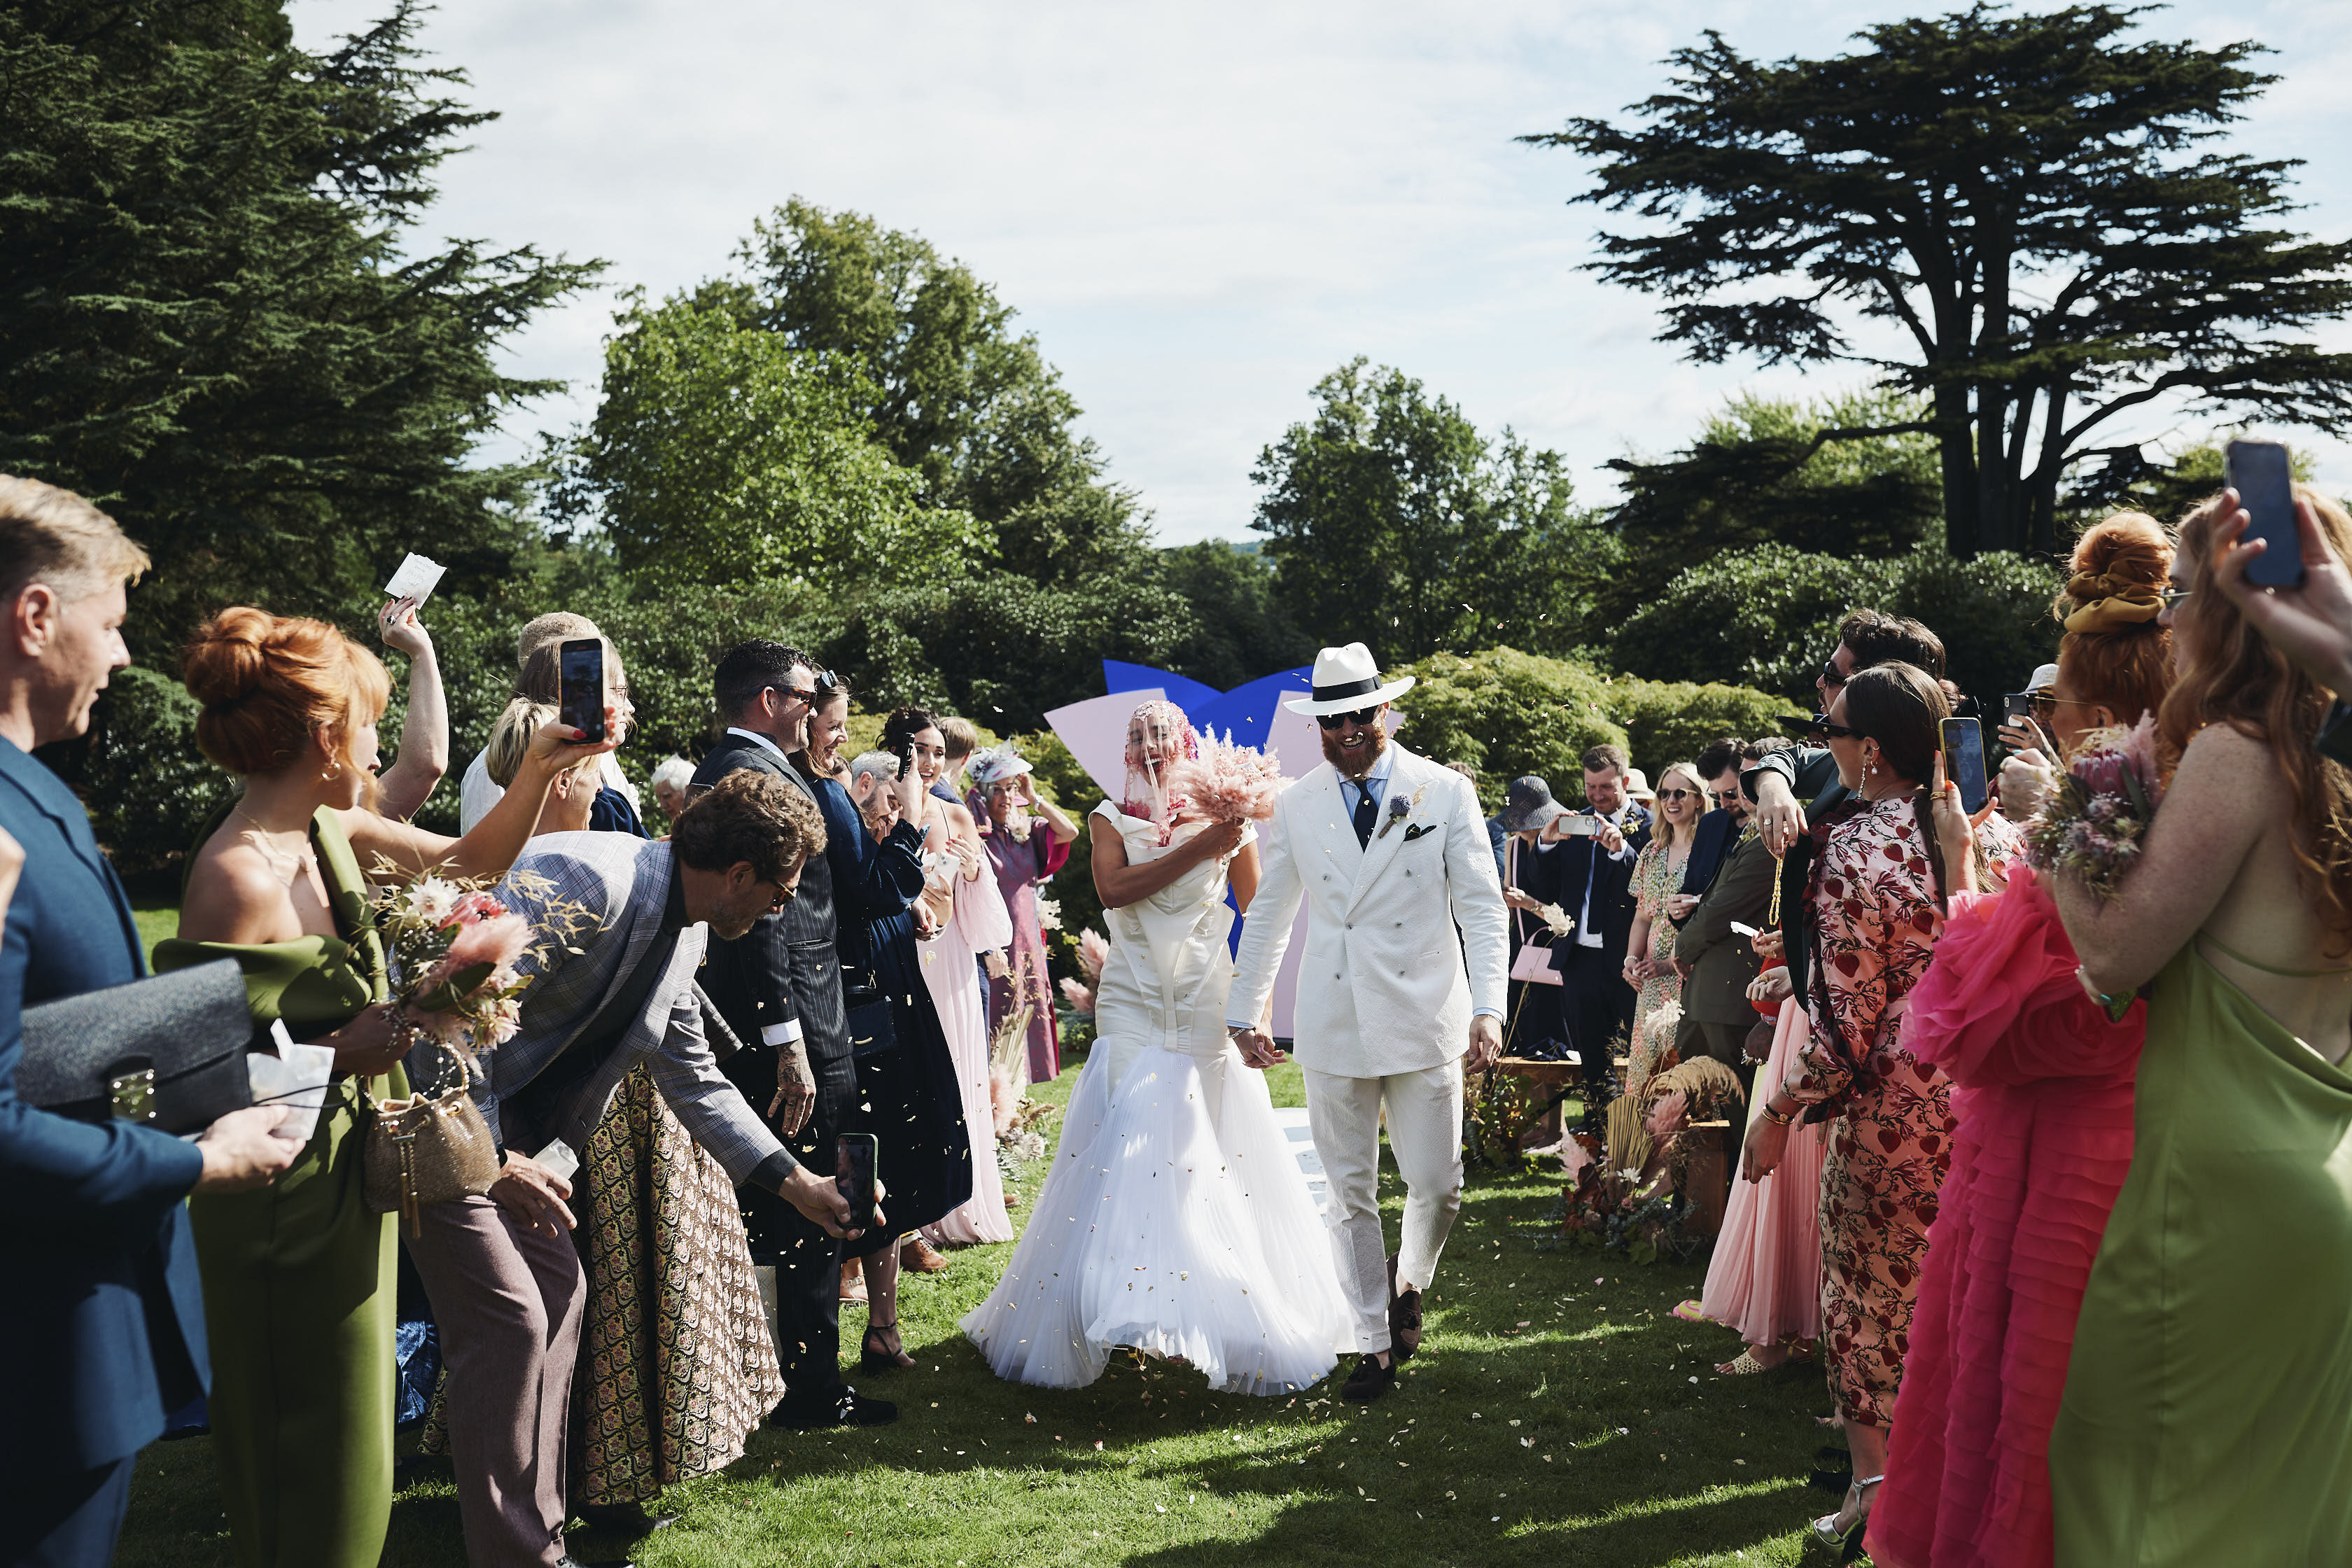 A bride and groom, wearing a long white dress and white suit, walking down an outdoor aisle surrounded by their guests.